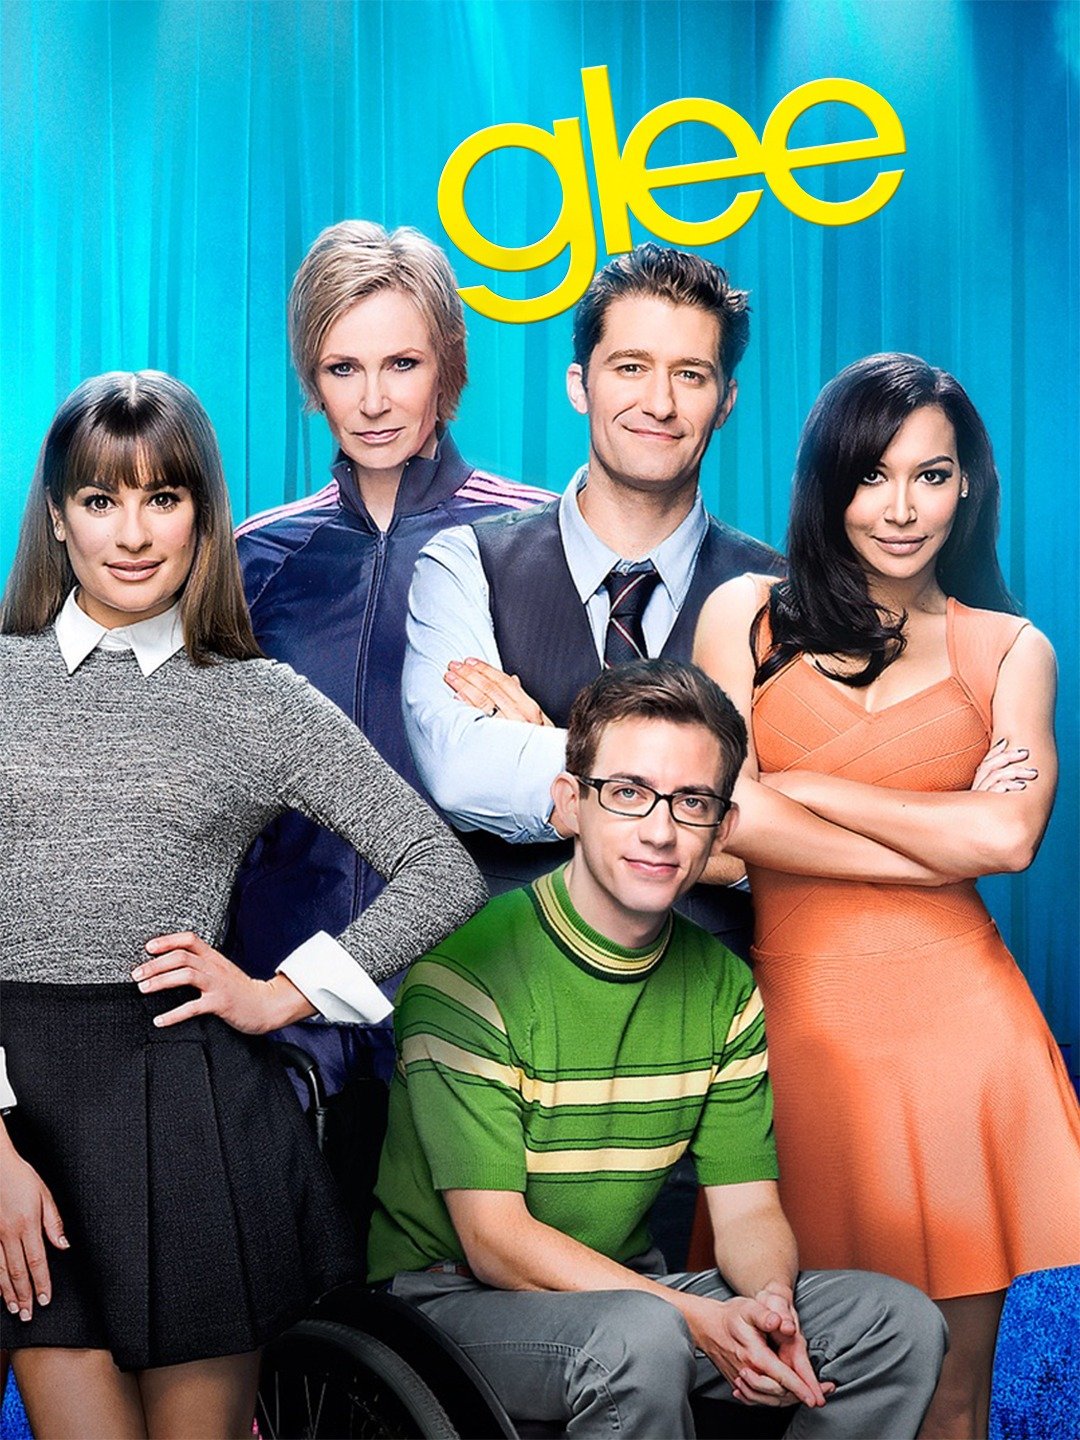 image for glee